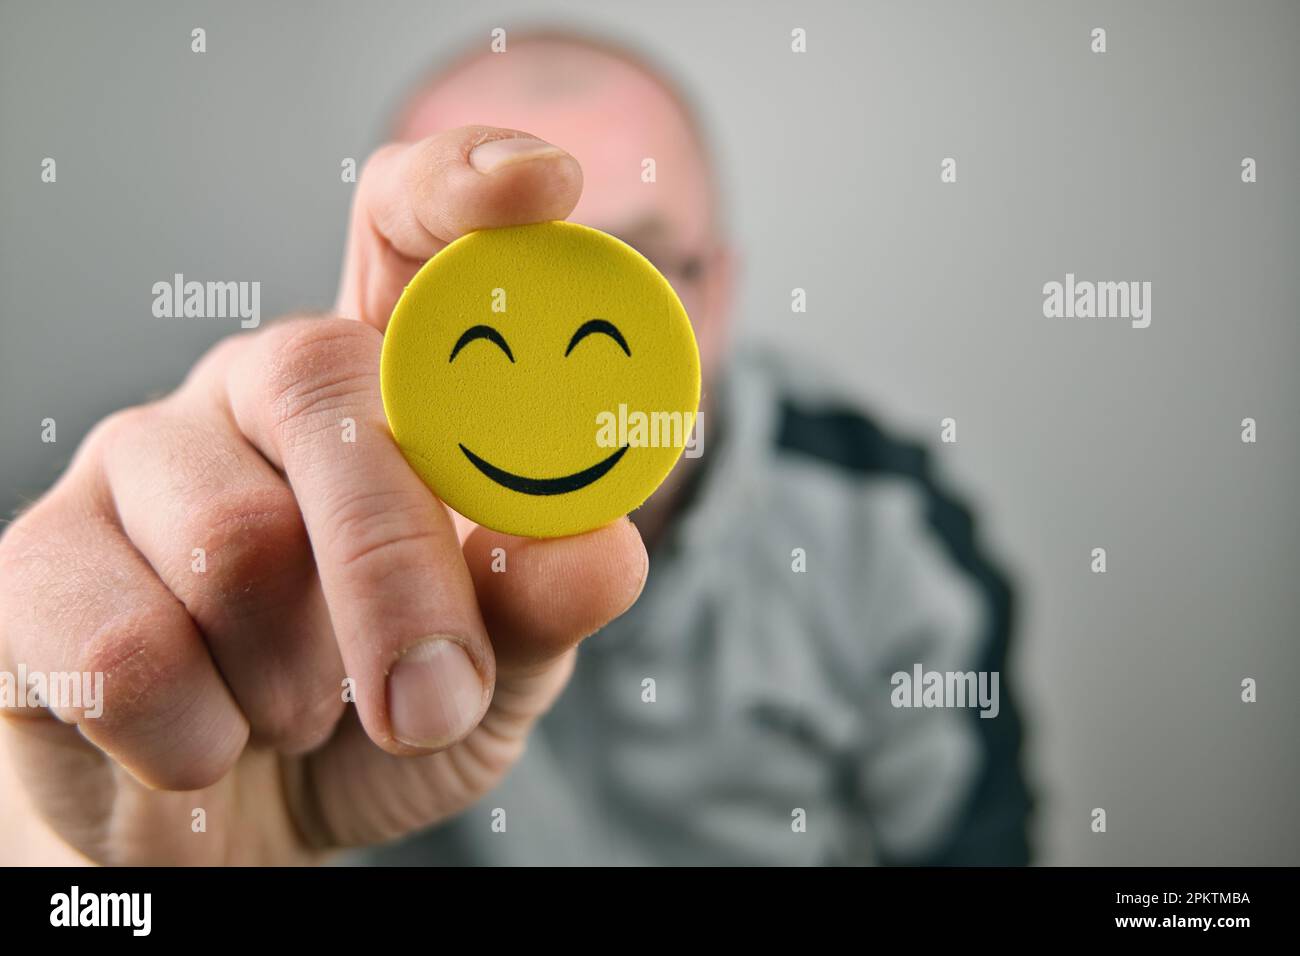 person holding yellow smiley face emoji in front of his face Stock Photo